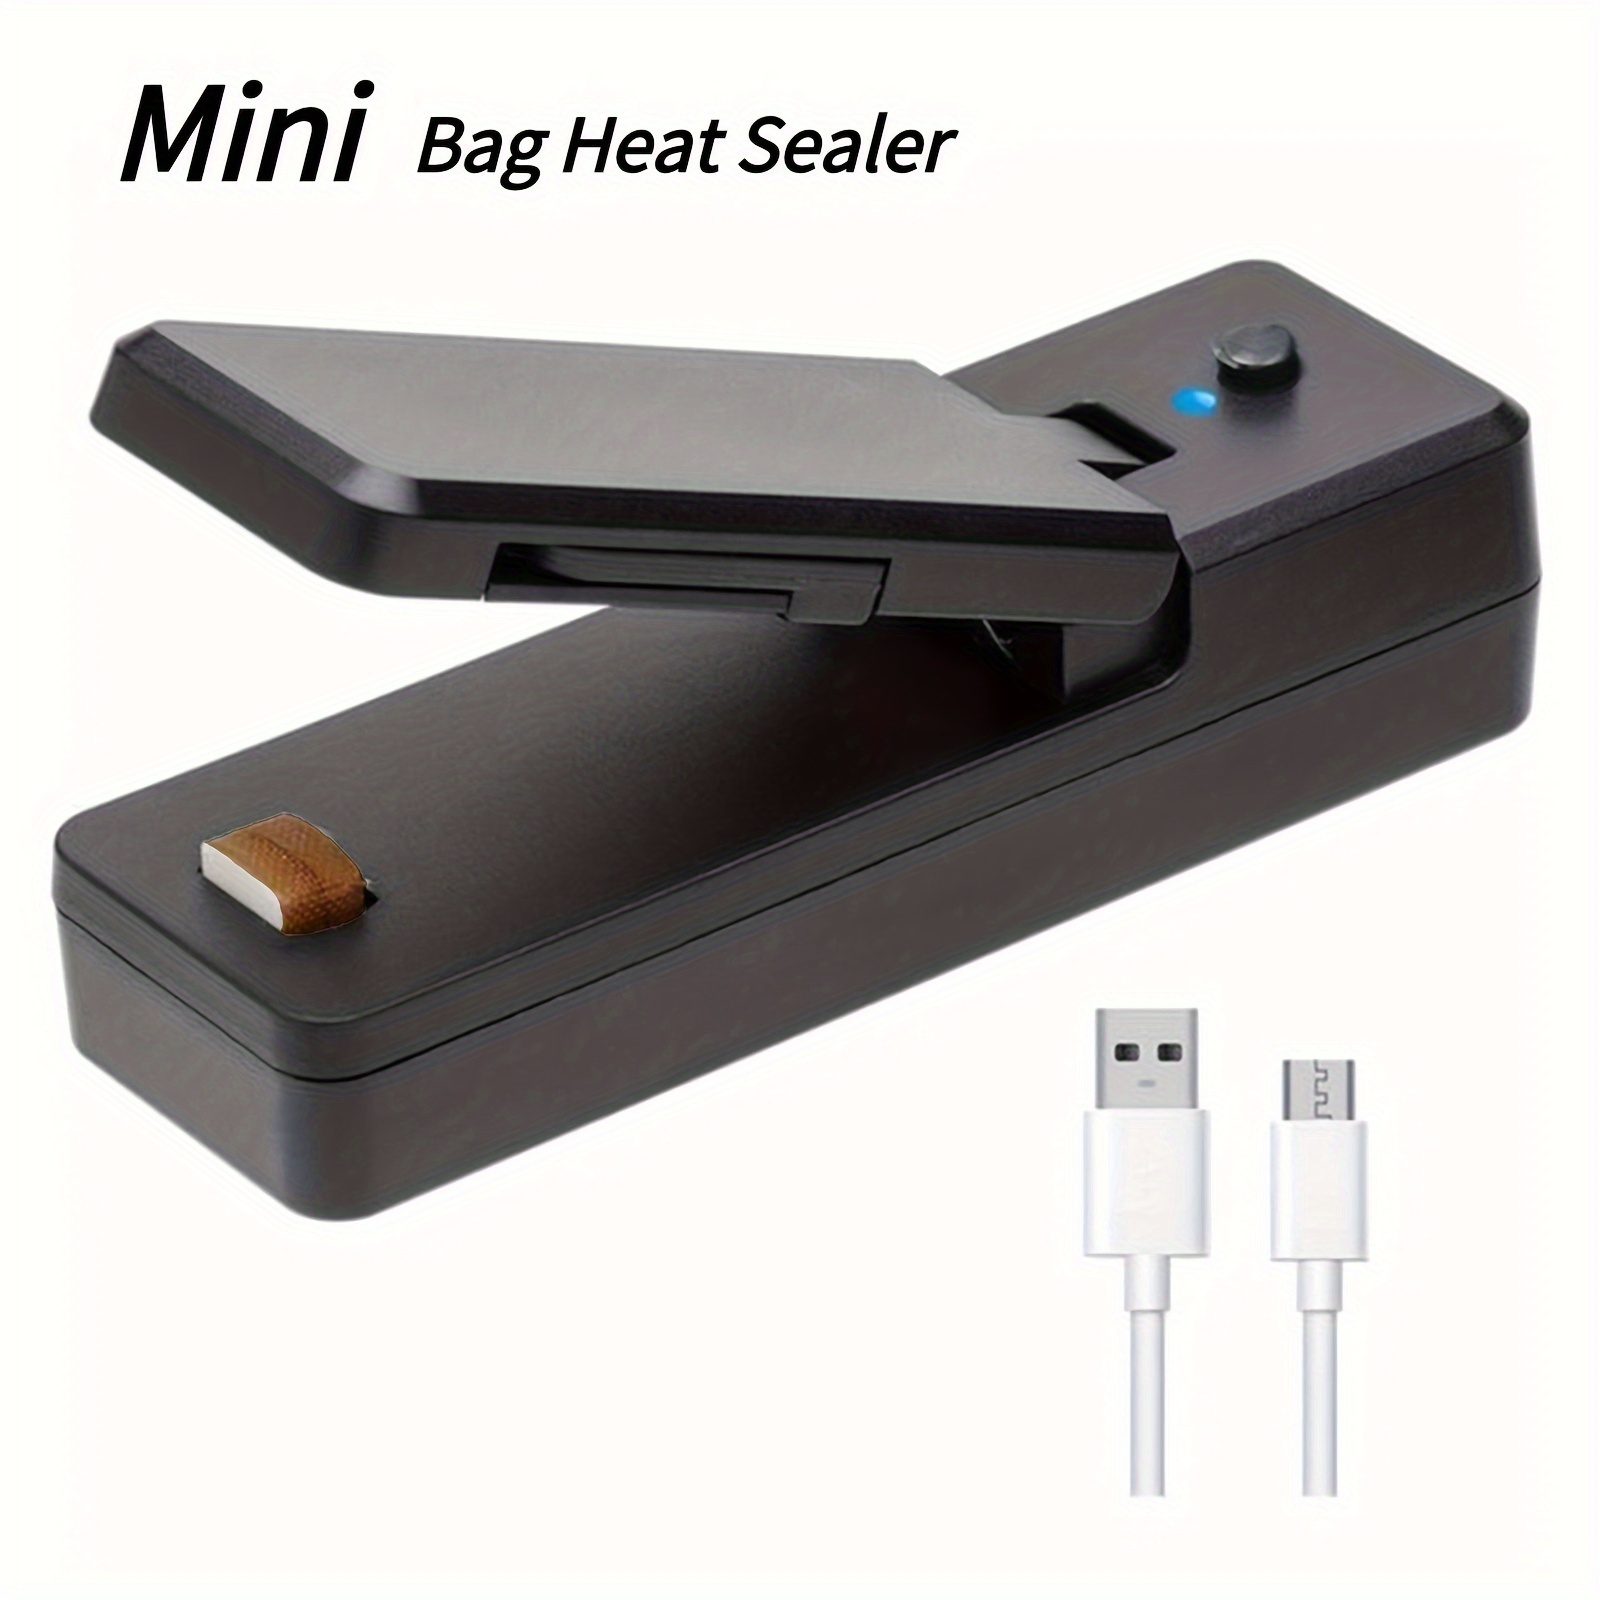  Mini Chip Bag Sealer - 2 In 1 Heat Sealer and Cutter - 400 mAh  Rechargeable Sealer USB Type c Cable Include - Gray: Home & Kitchen